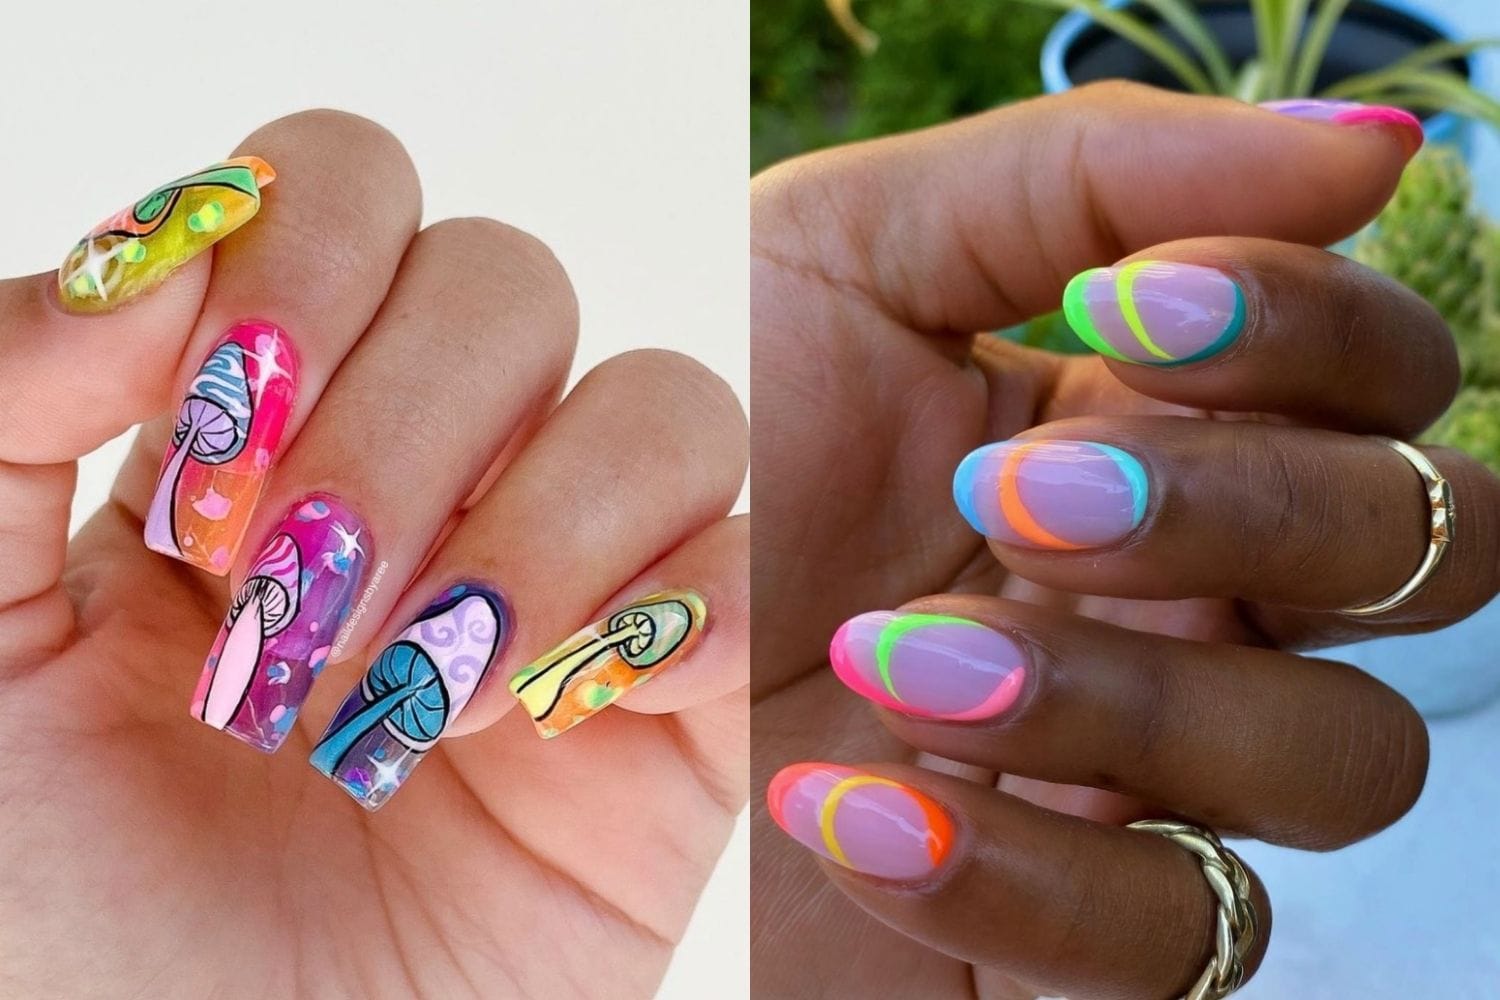 5. "Neon Summer 19 Nail Colors" - wide 3